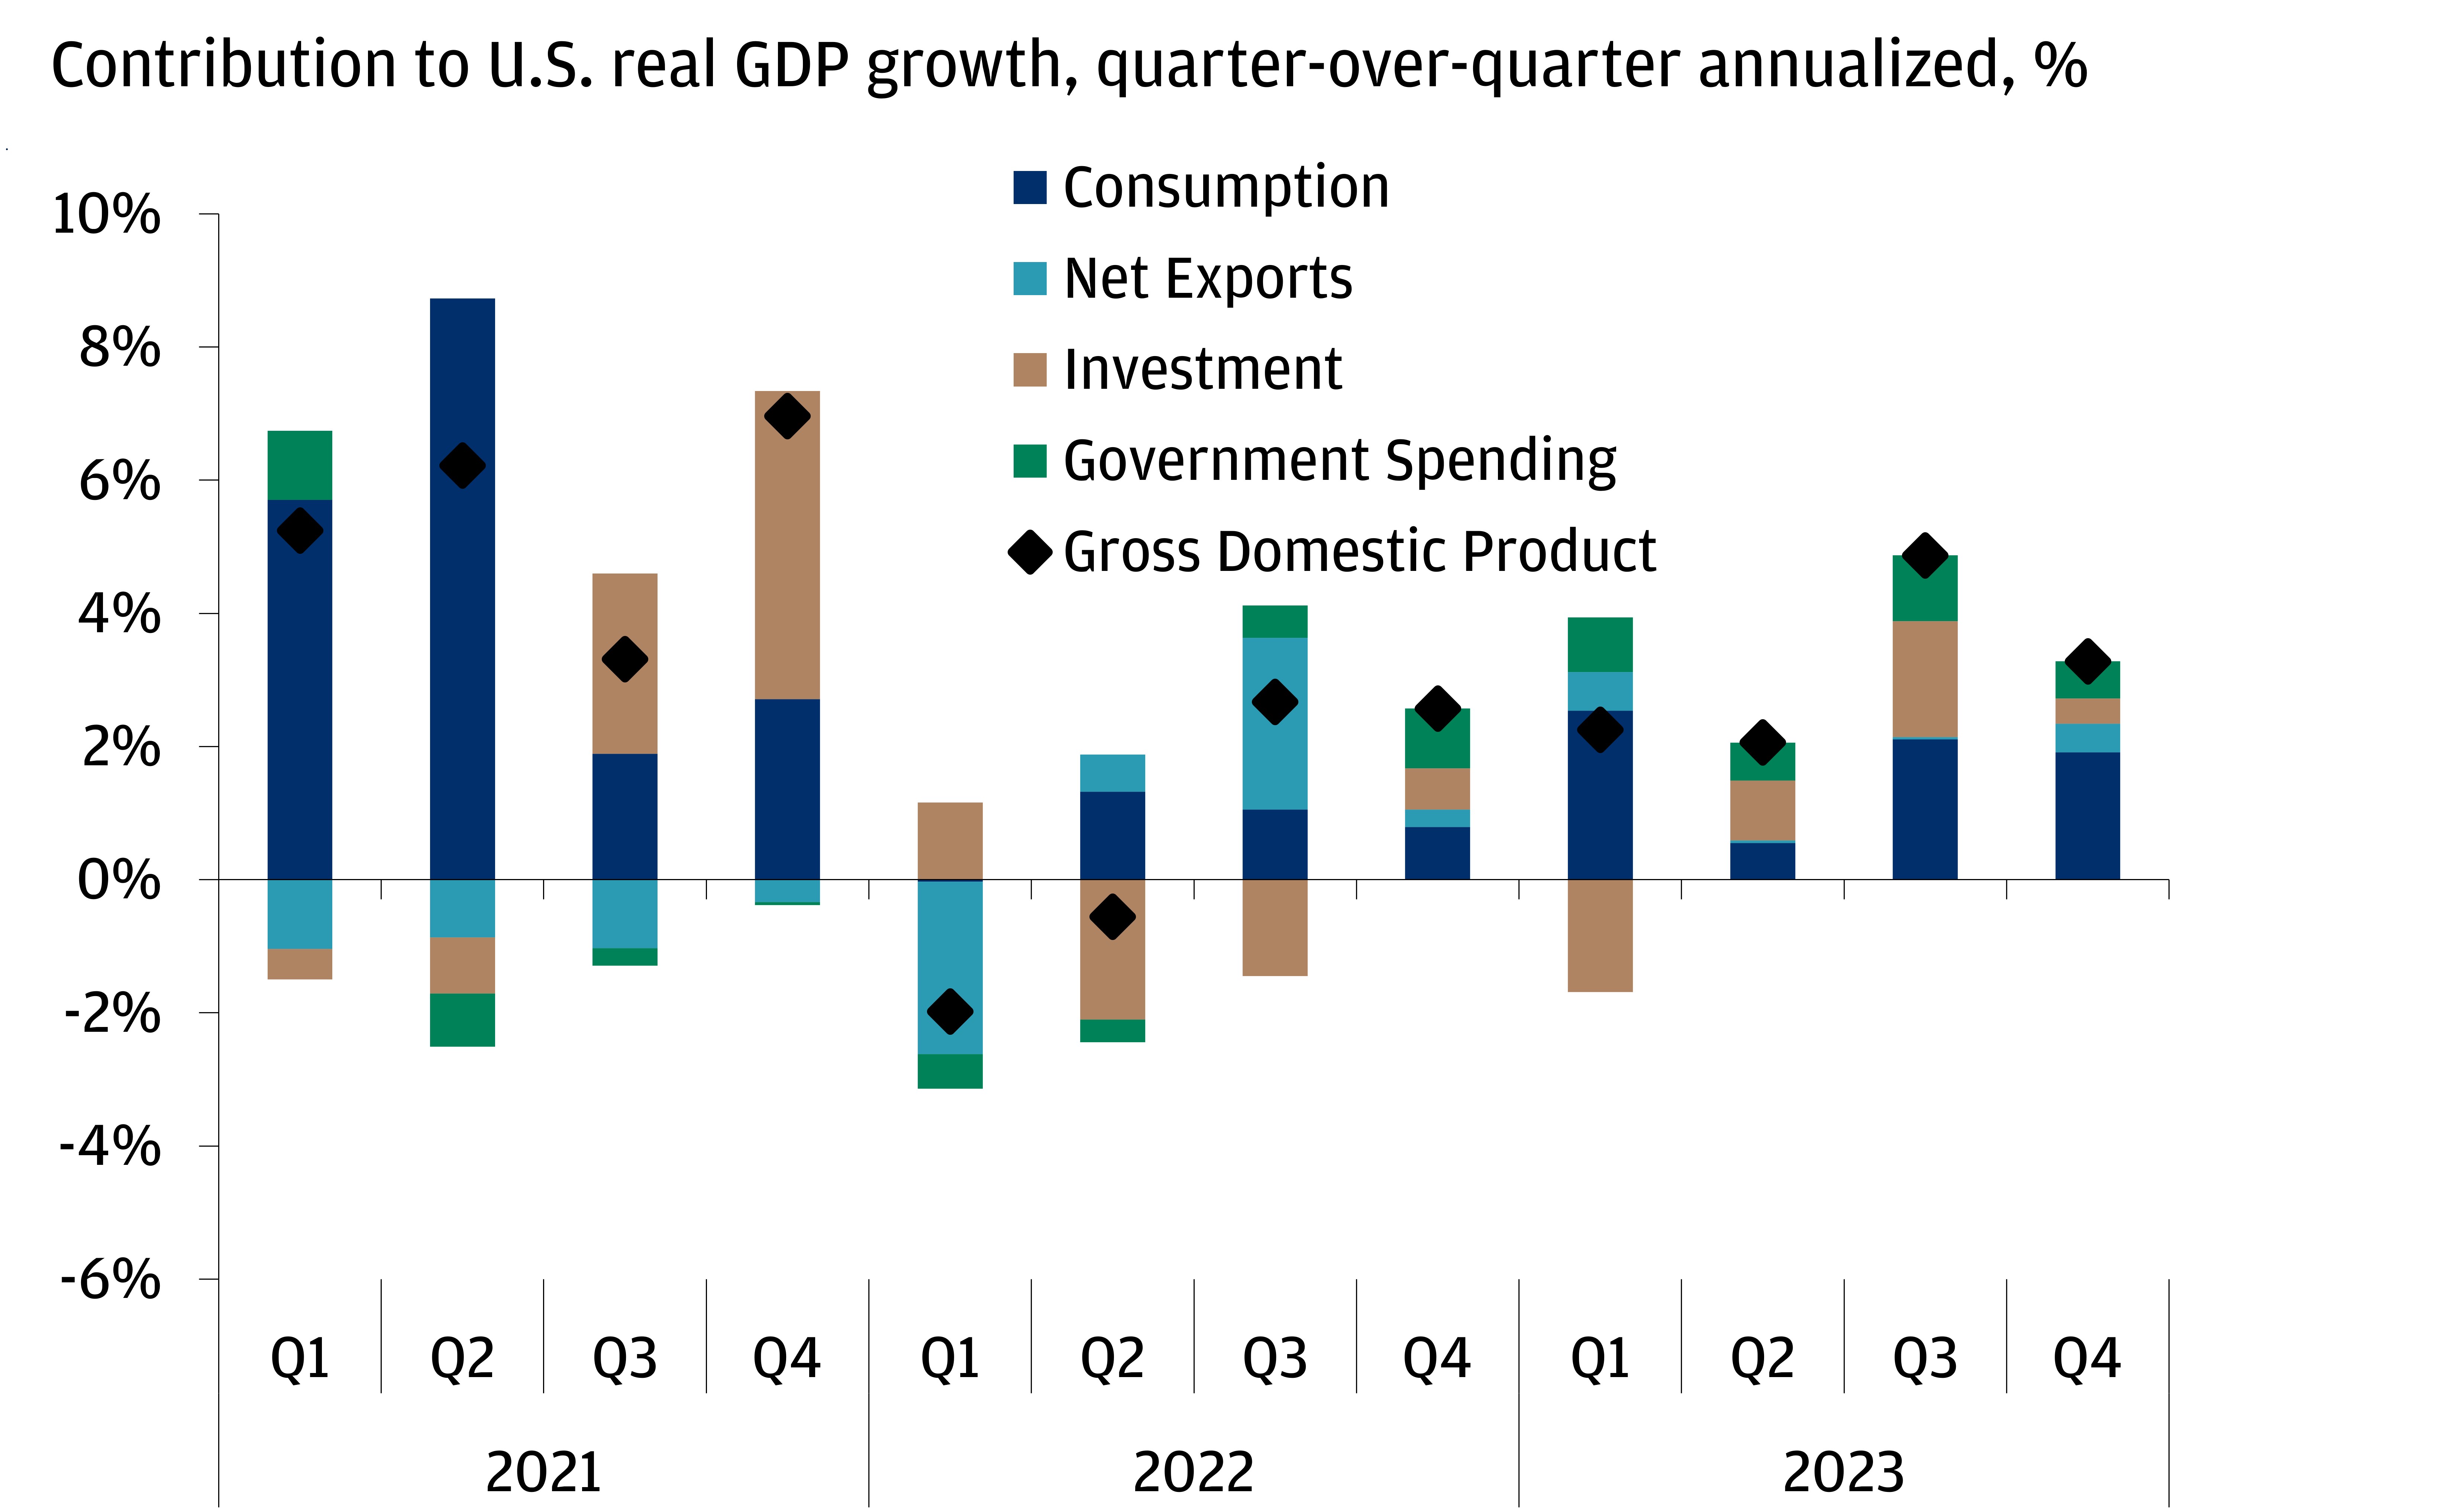 This chart shows the contribution to U.S. real GDP growth, quarter-over-quarter annualized as a percentage.